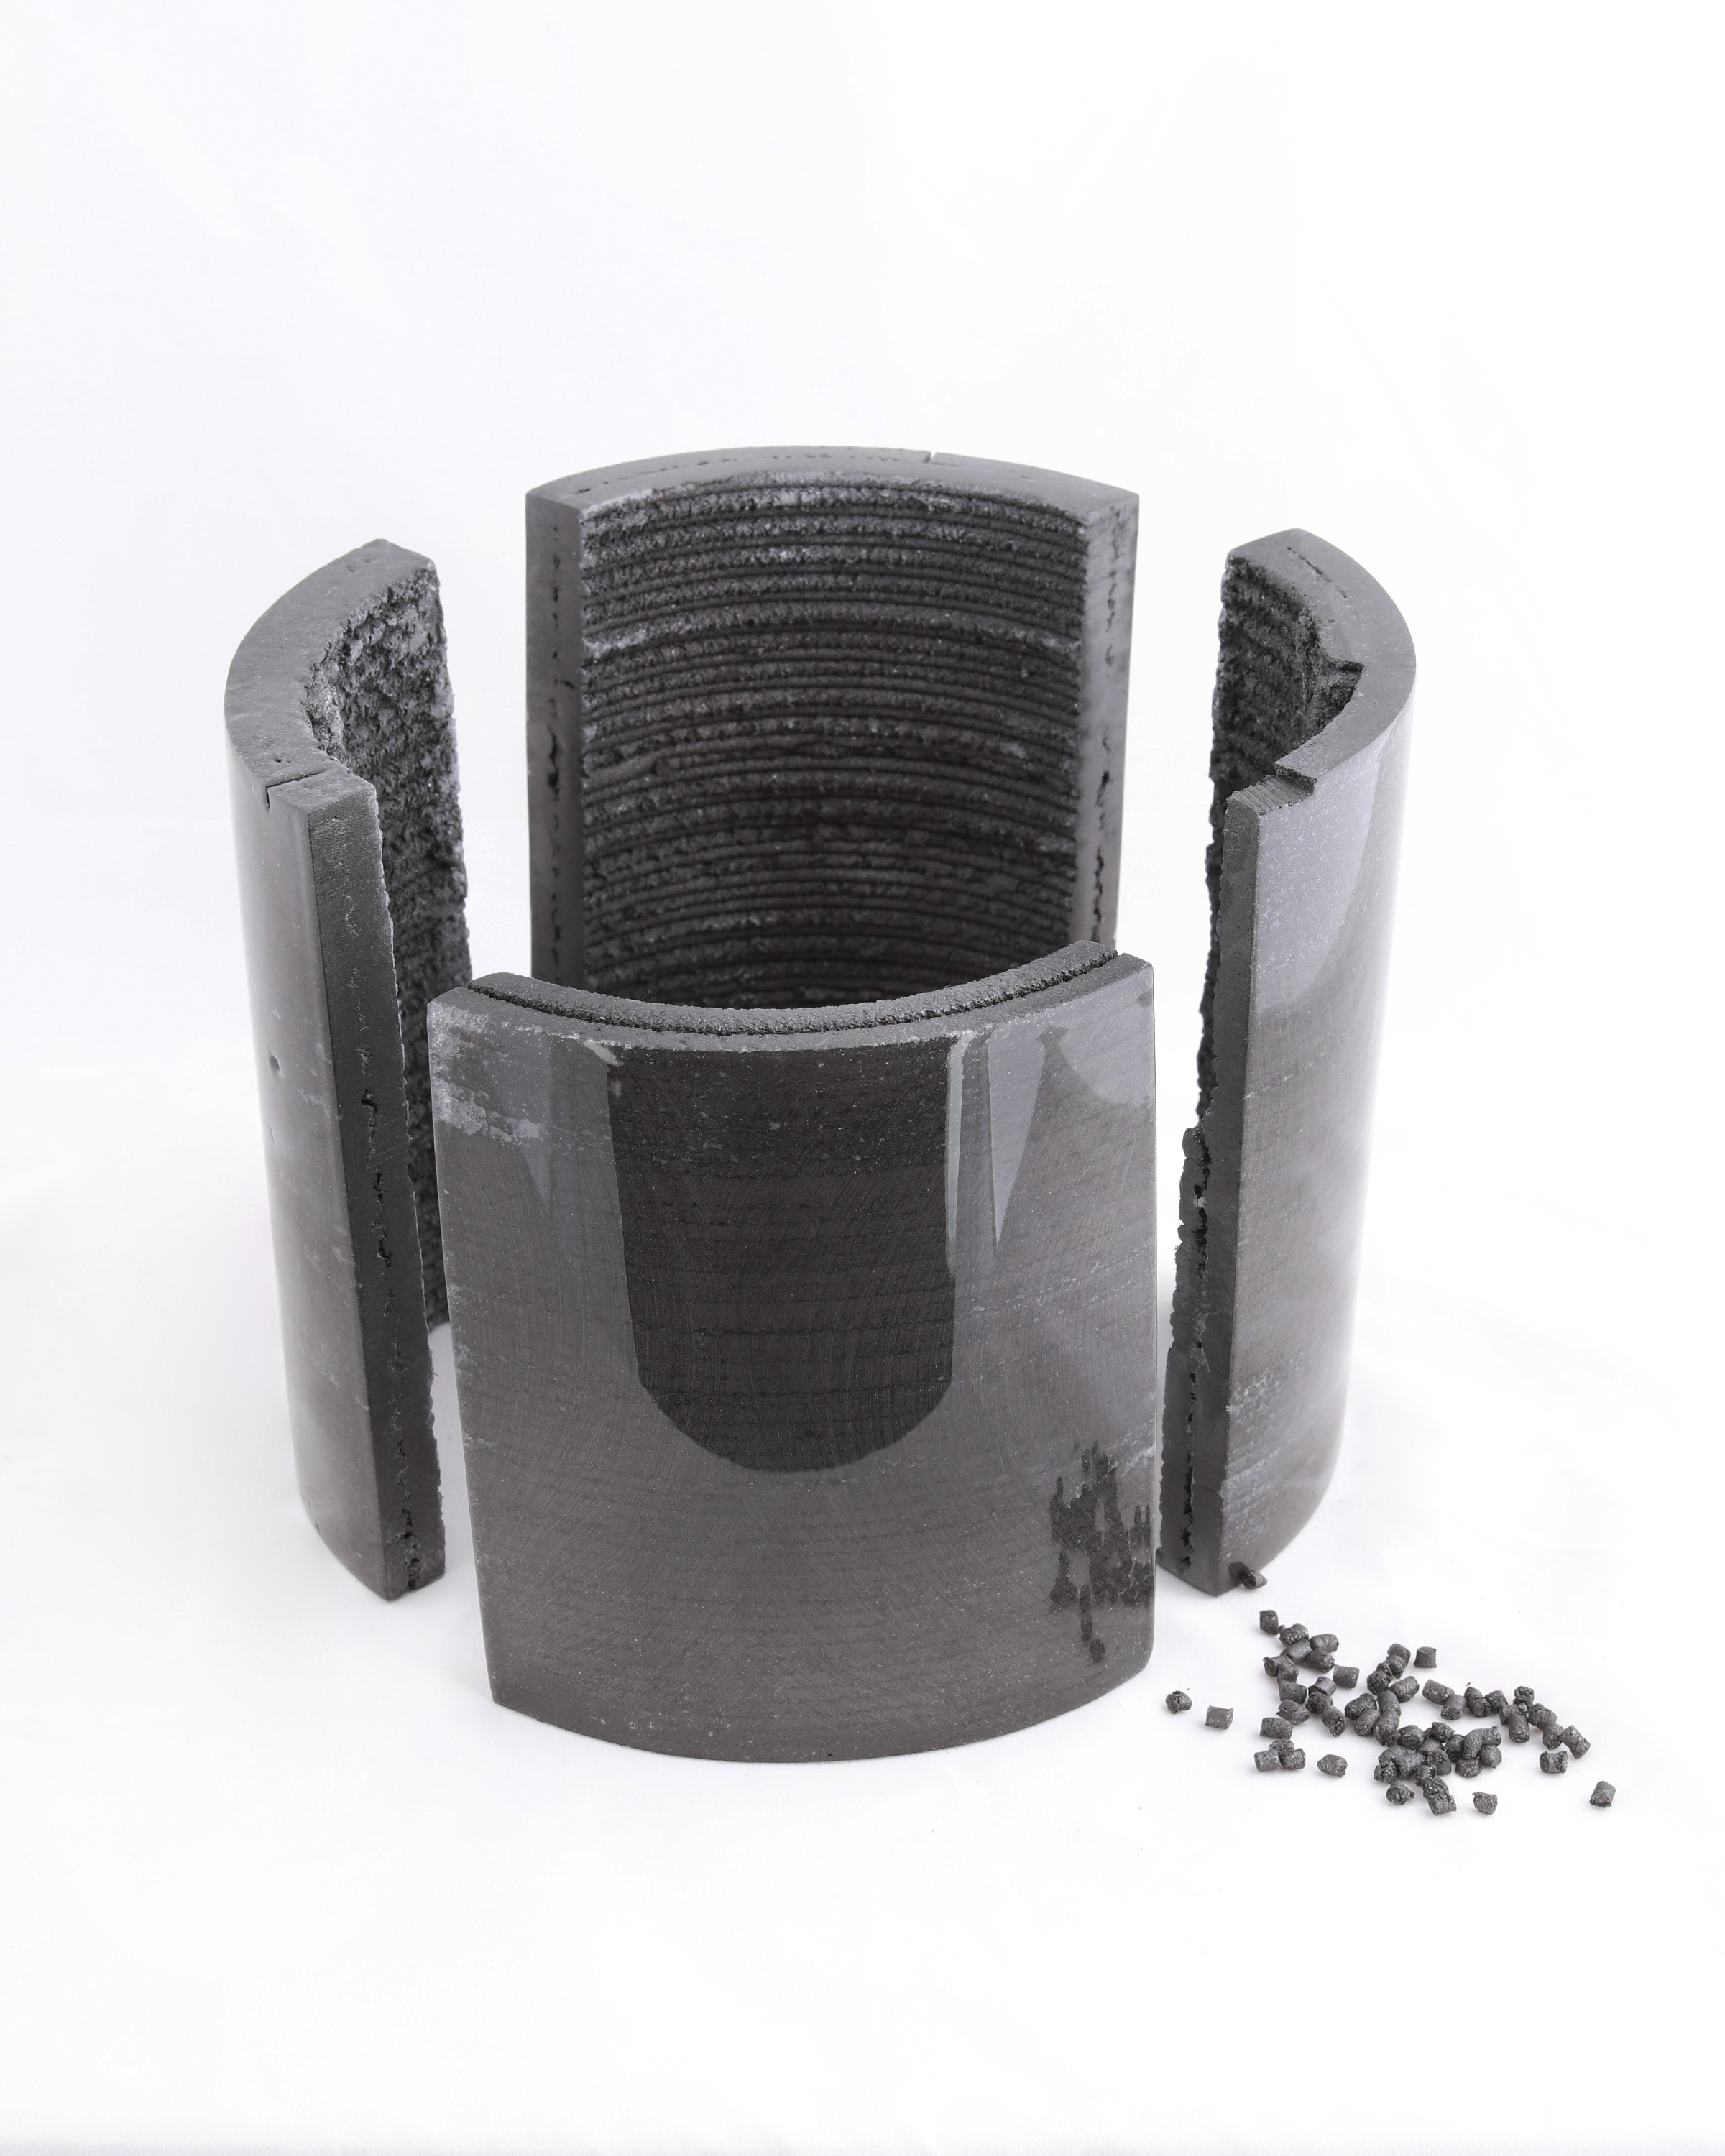 Composite pellets are melted, compounded, and extruded layer-by-layer into desired forms.